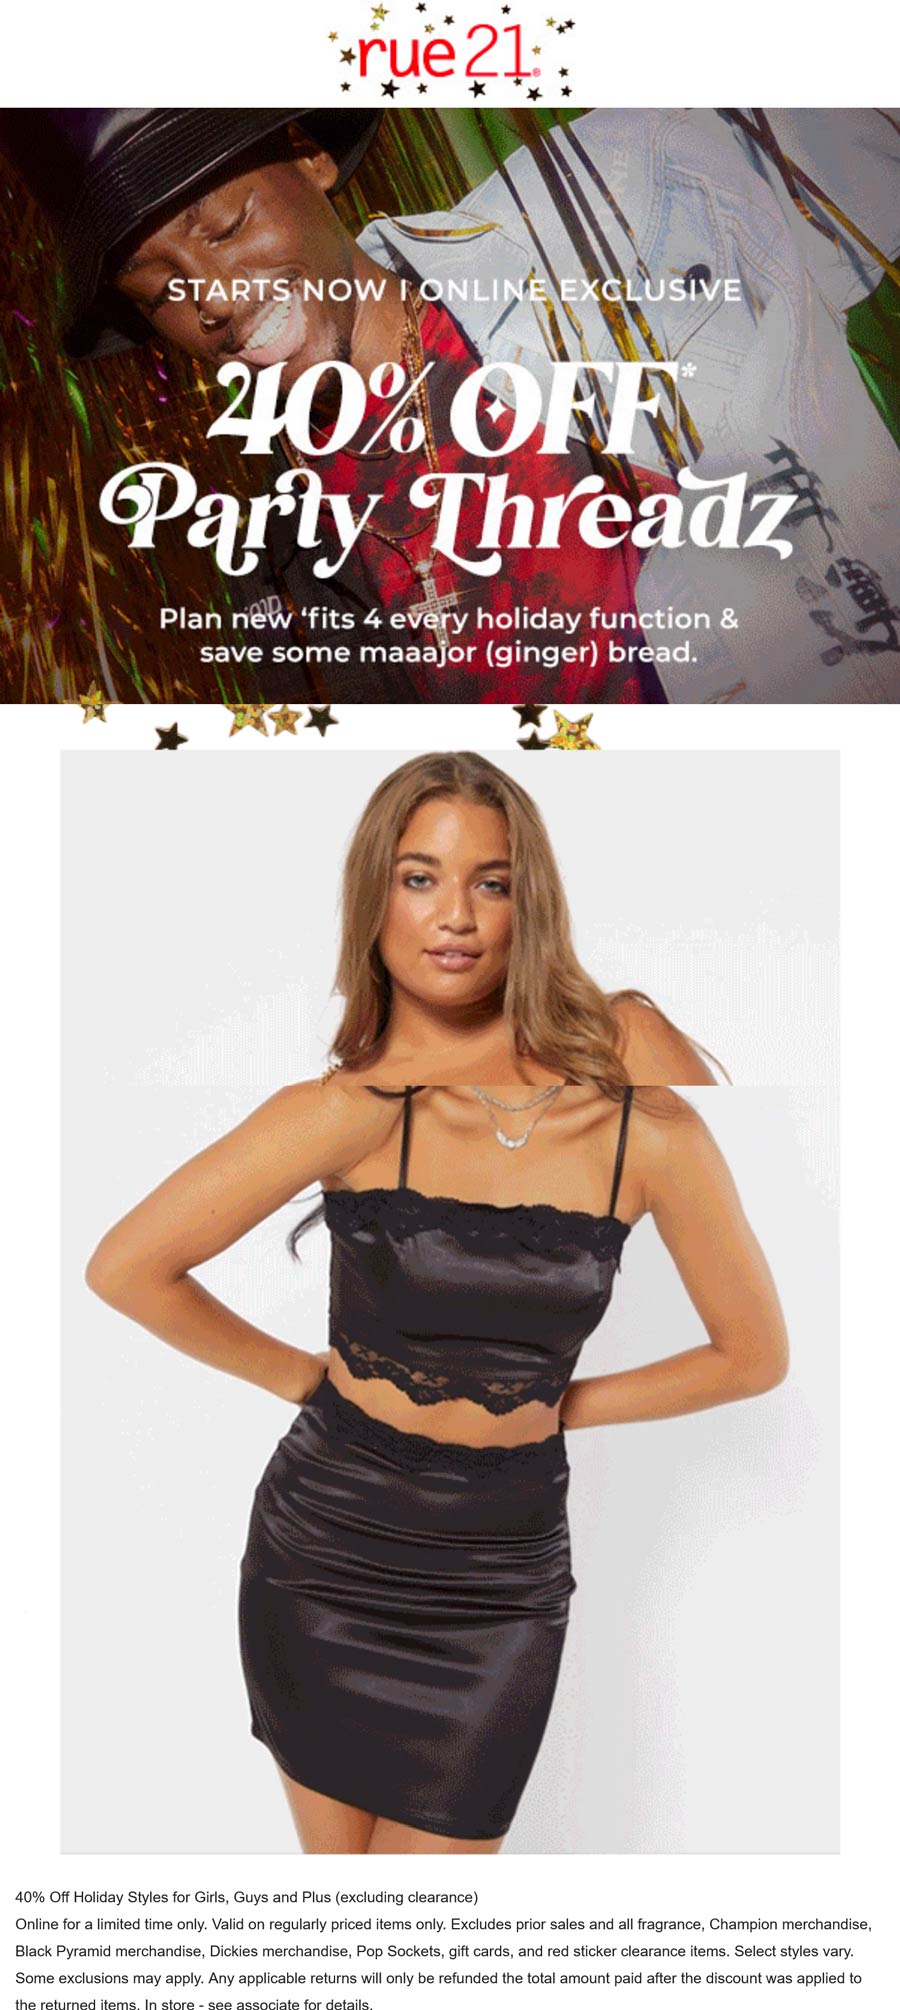 rue21 stores Coupon  40% off holiday styles party threadz online at rue21 #rue21 